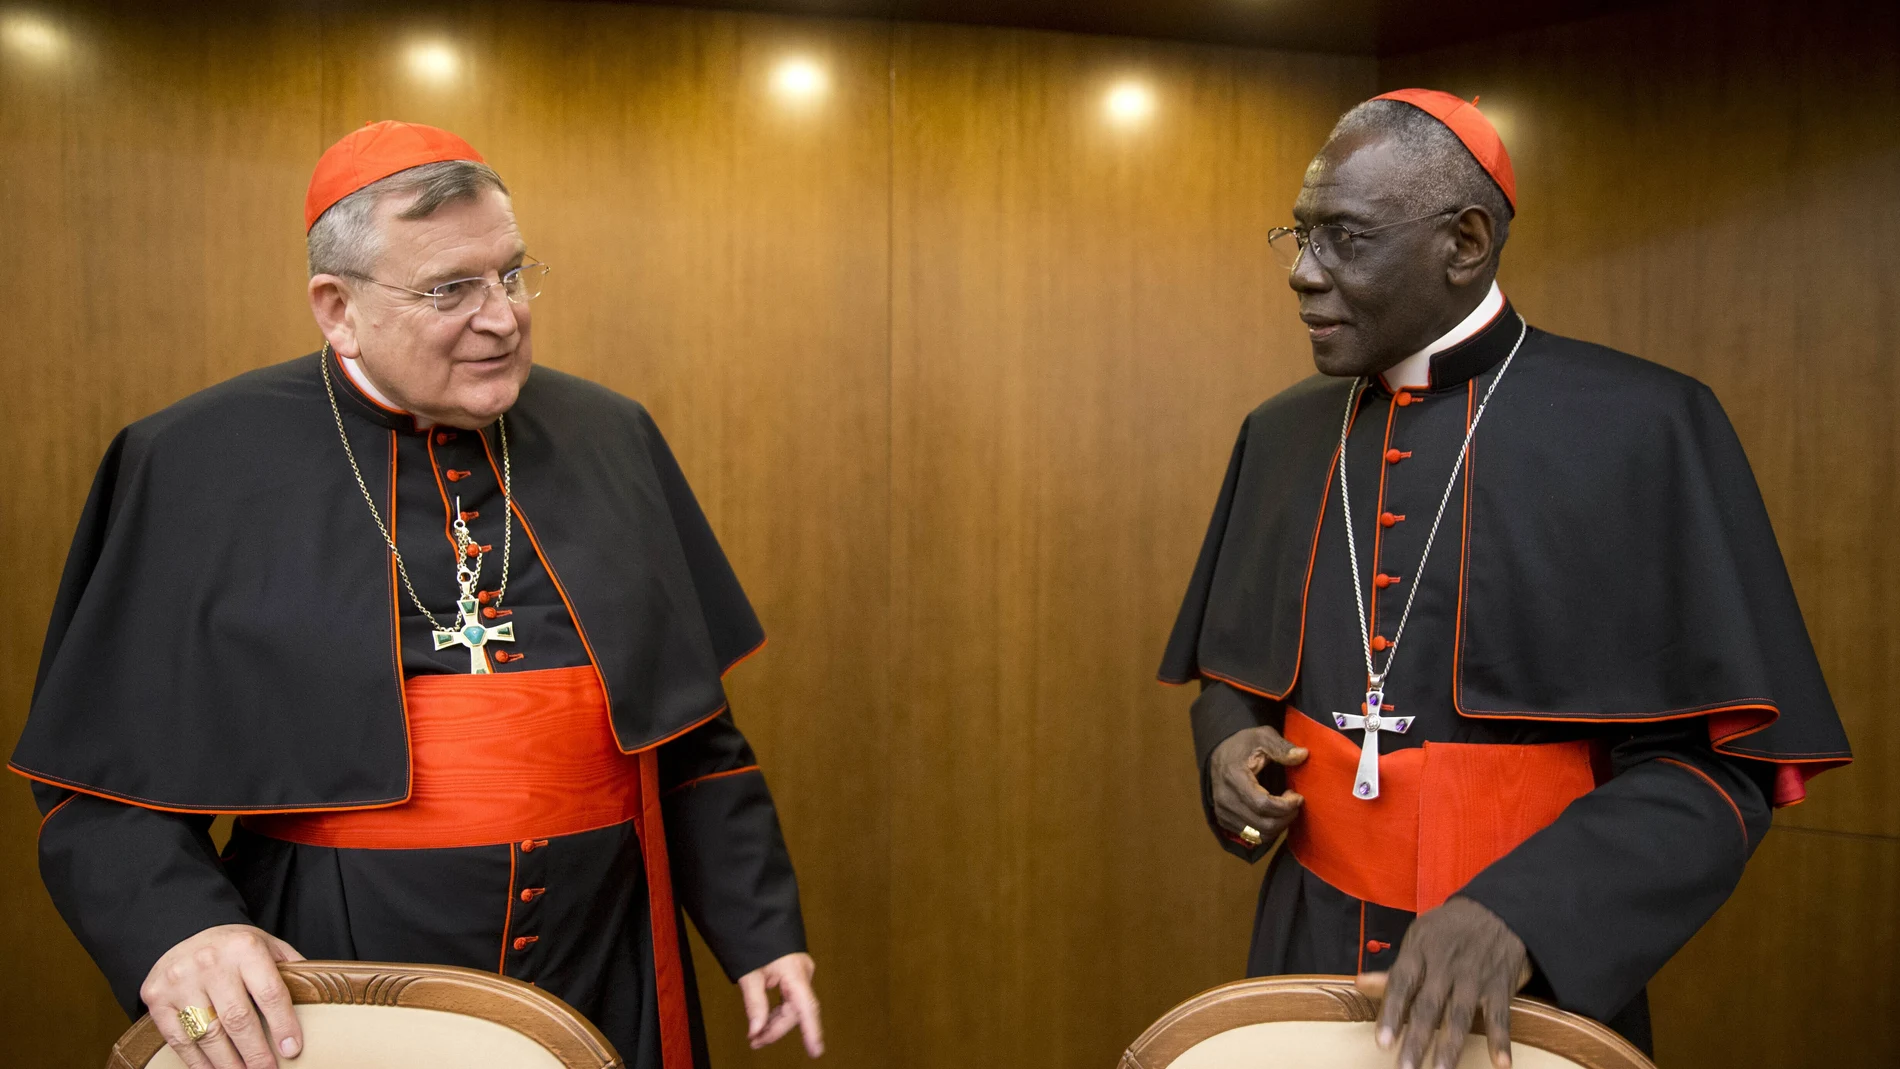 Cardinal Raymond Leo Burke, left, talks with Cardinal Robert Sarah, prefect of the Congregation for Divine Worship and the Discipline of the Sacraments. Five conservative cardinals are challenging Pope Francis to affirm Catholic teaching on homosexuality and female ordination. They've asked him to respond ahead of a big Vatican meeting where such hot-button issues are up for debate.